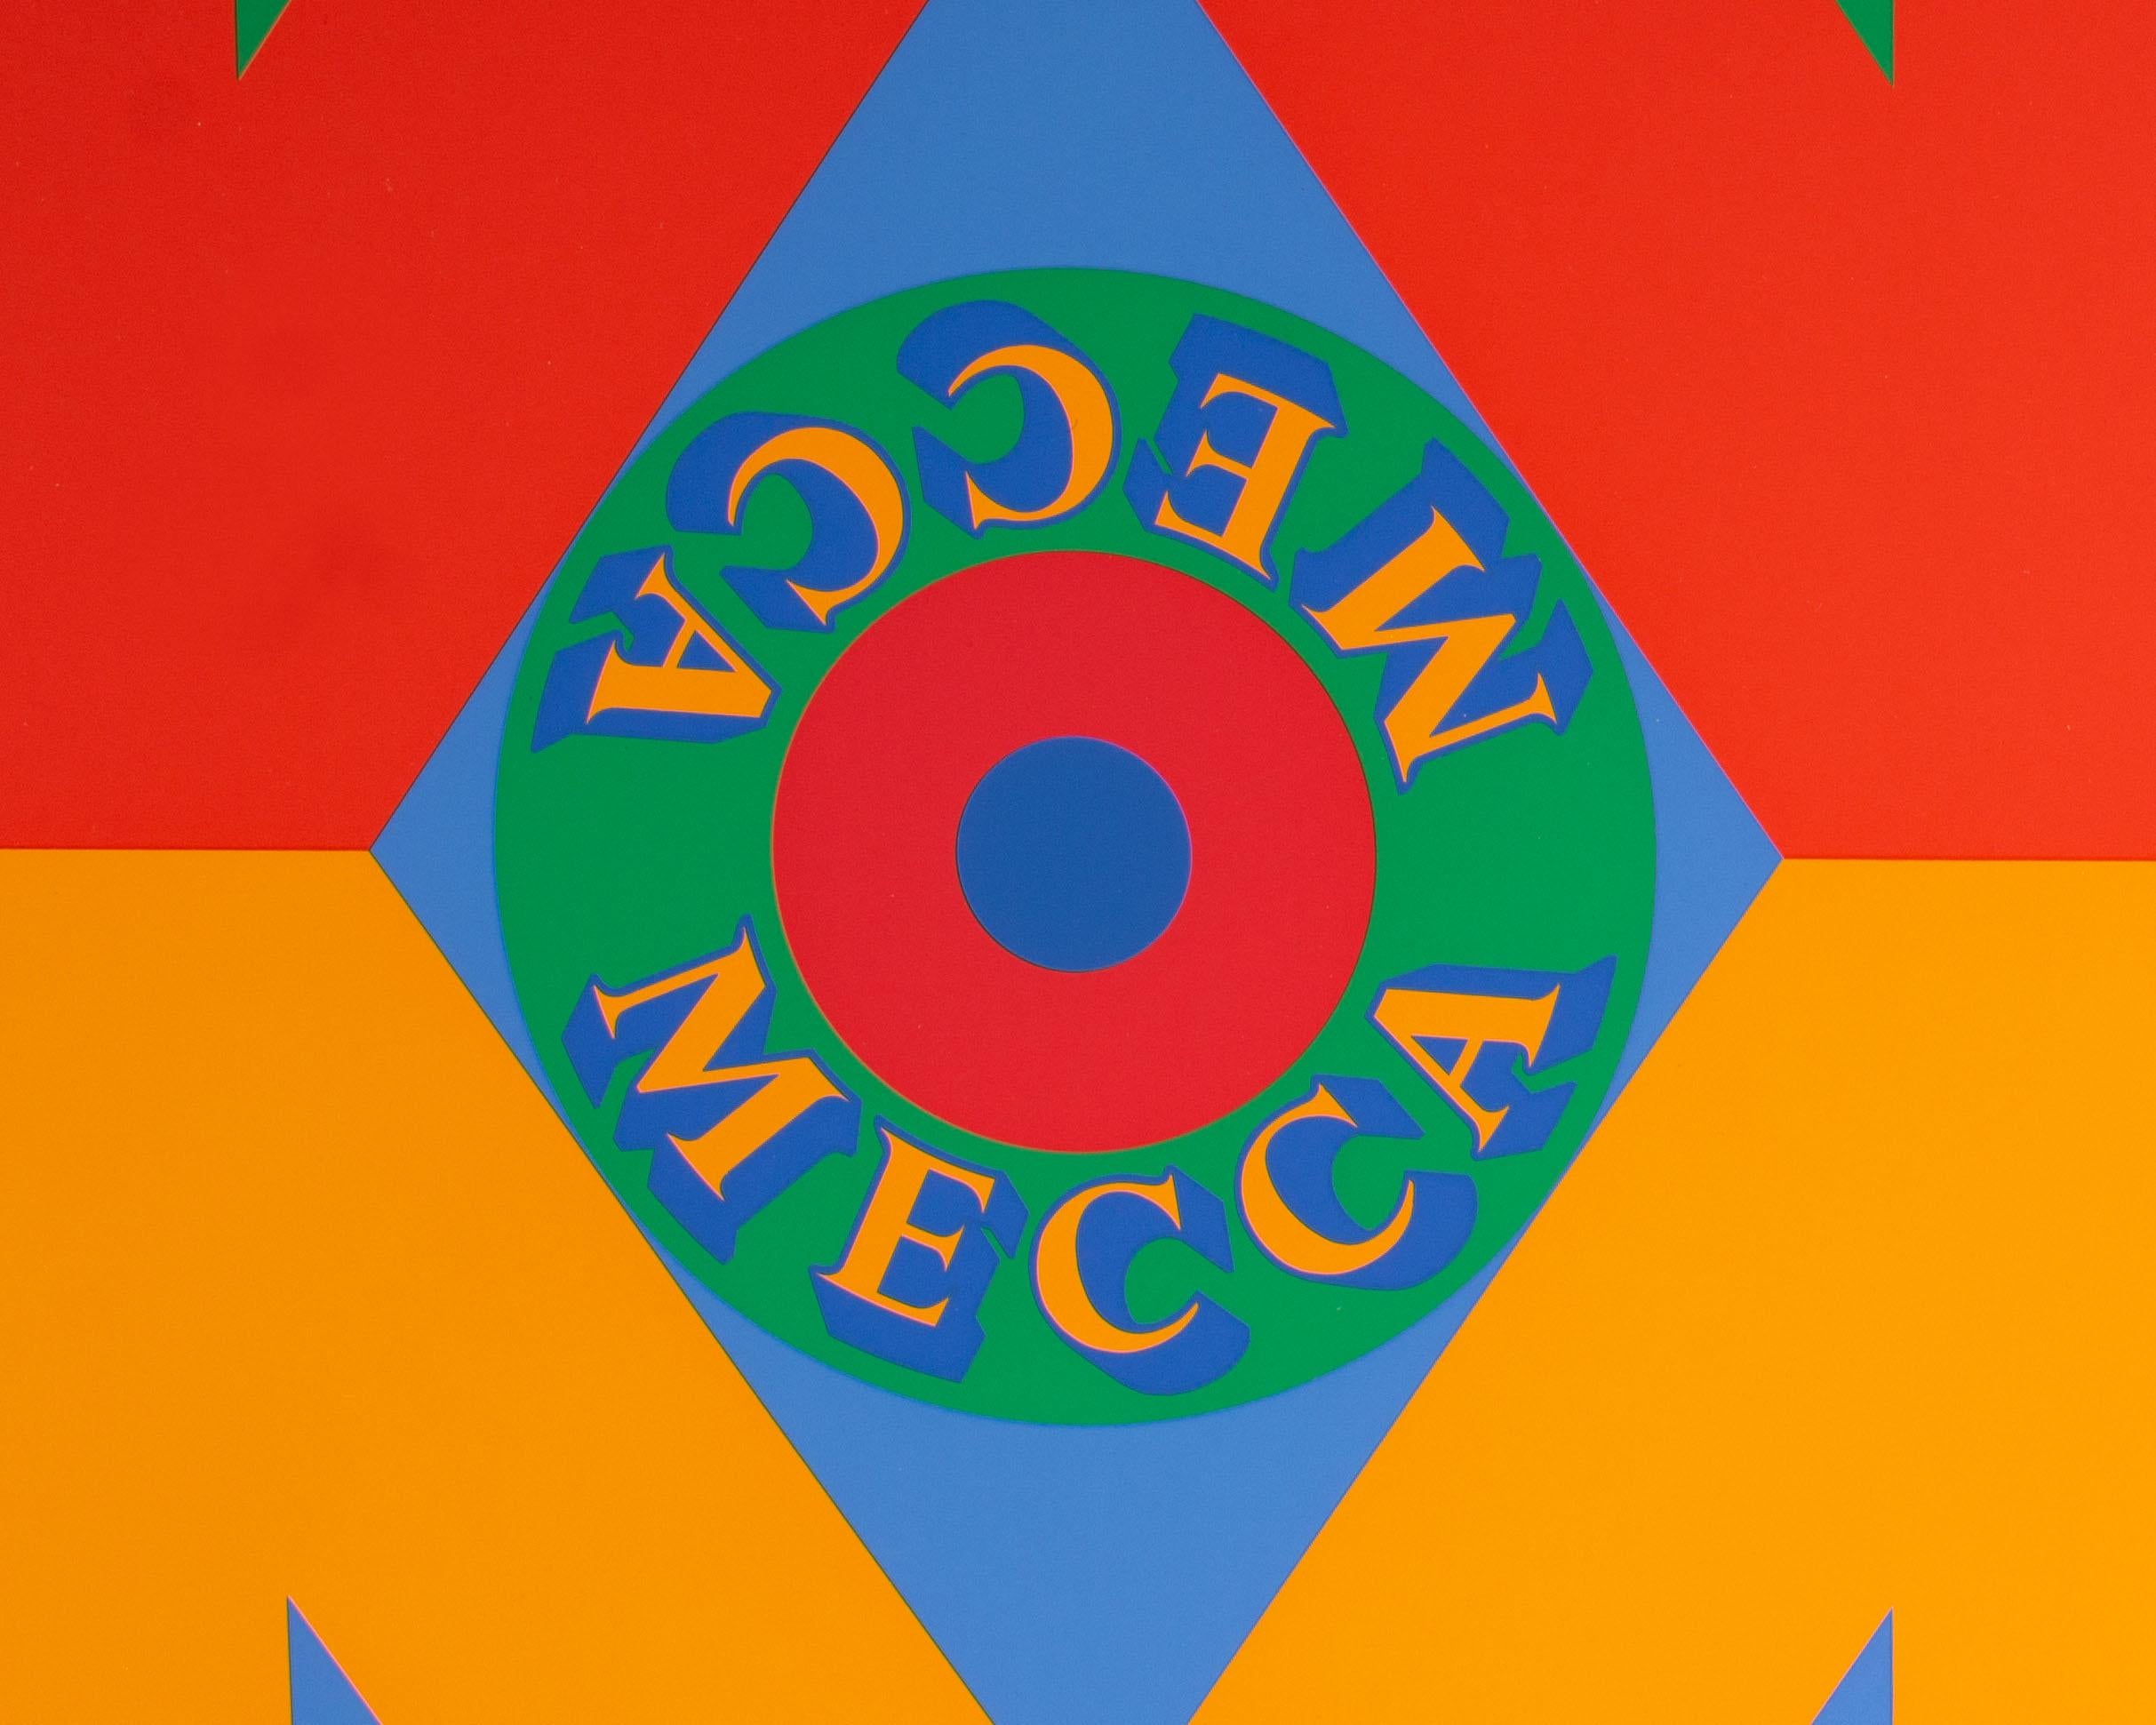 A 1977 limited edition serigraph titled 